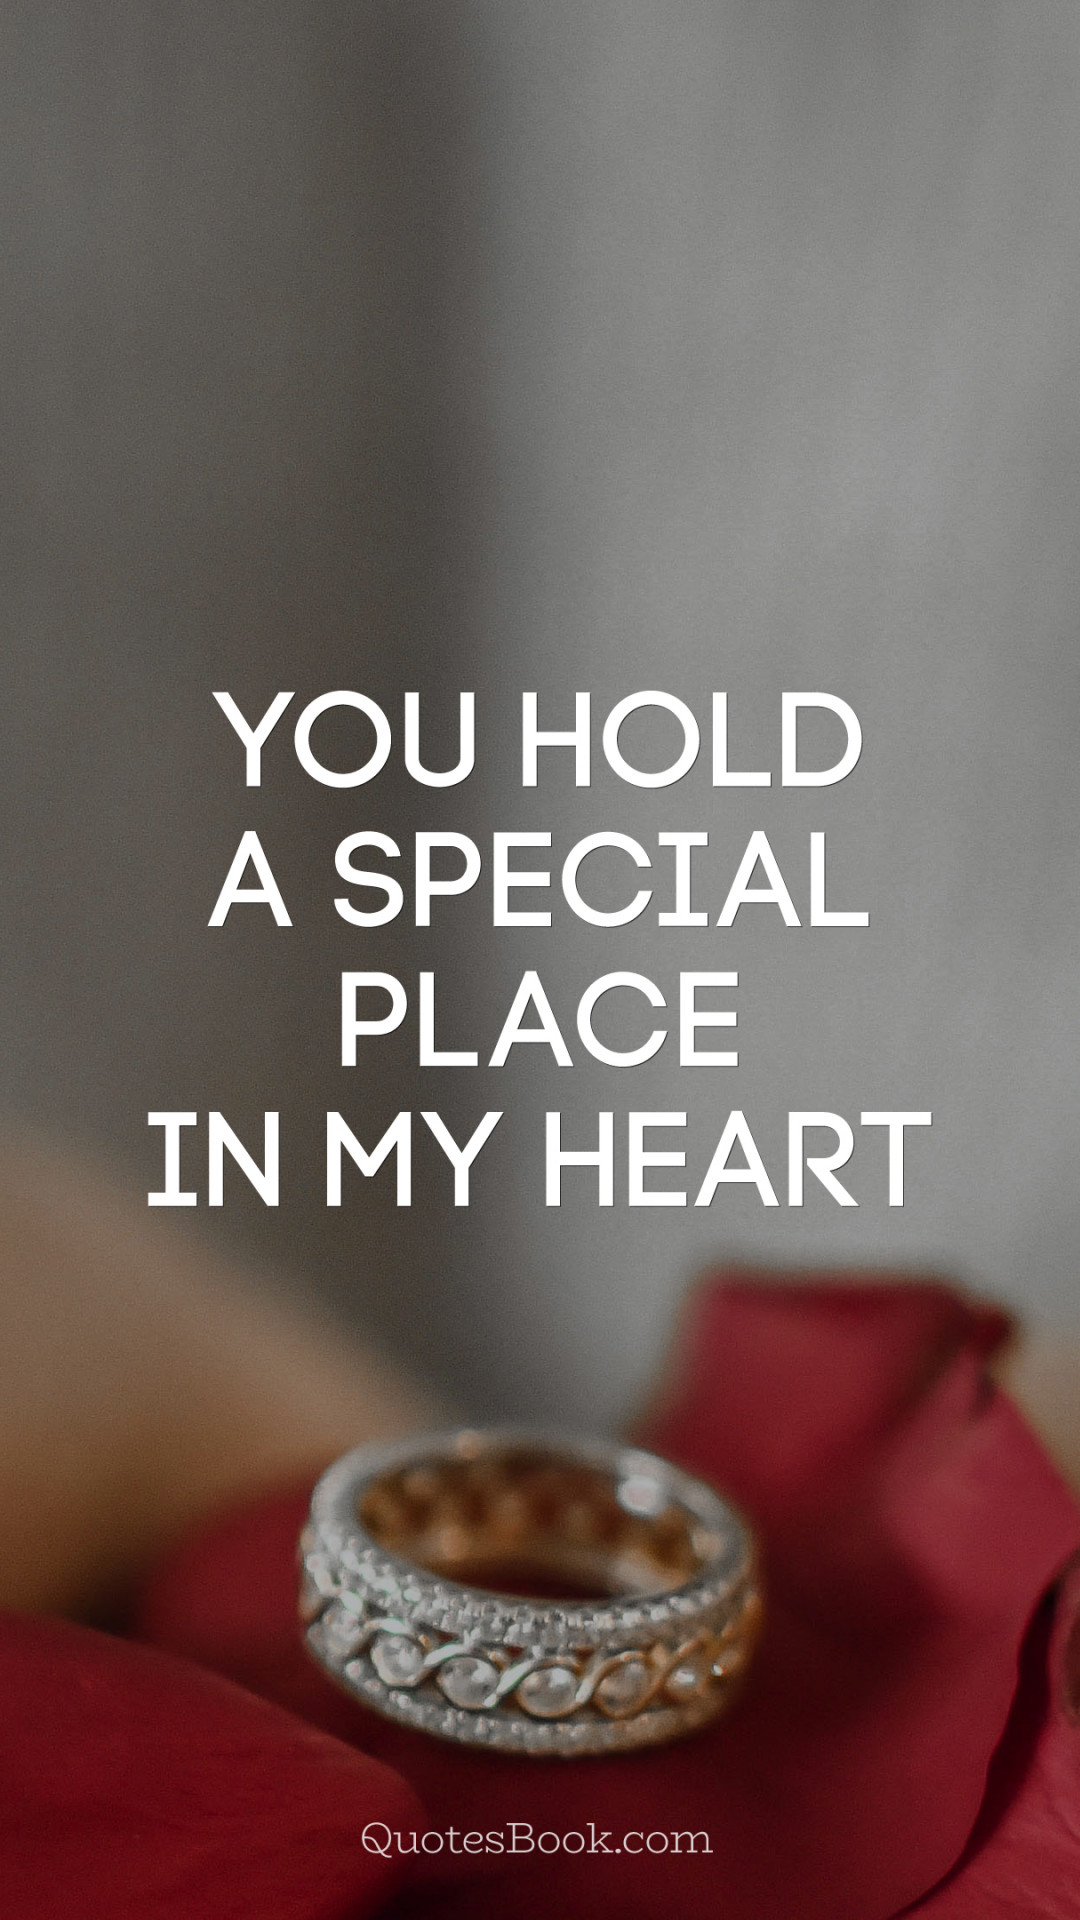 you hold a special place in my heart 1080x1920 1166